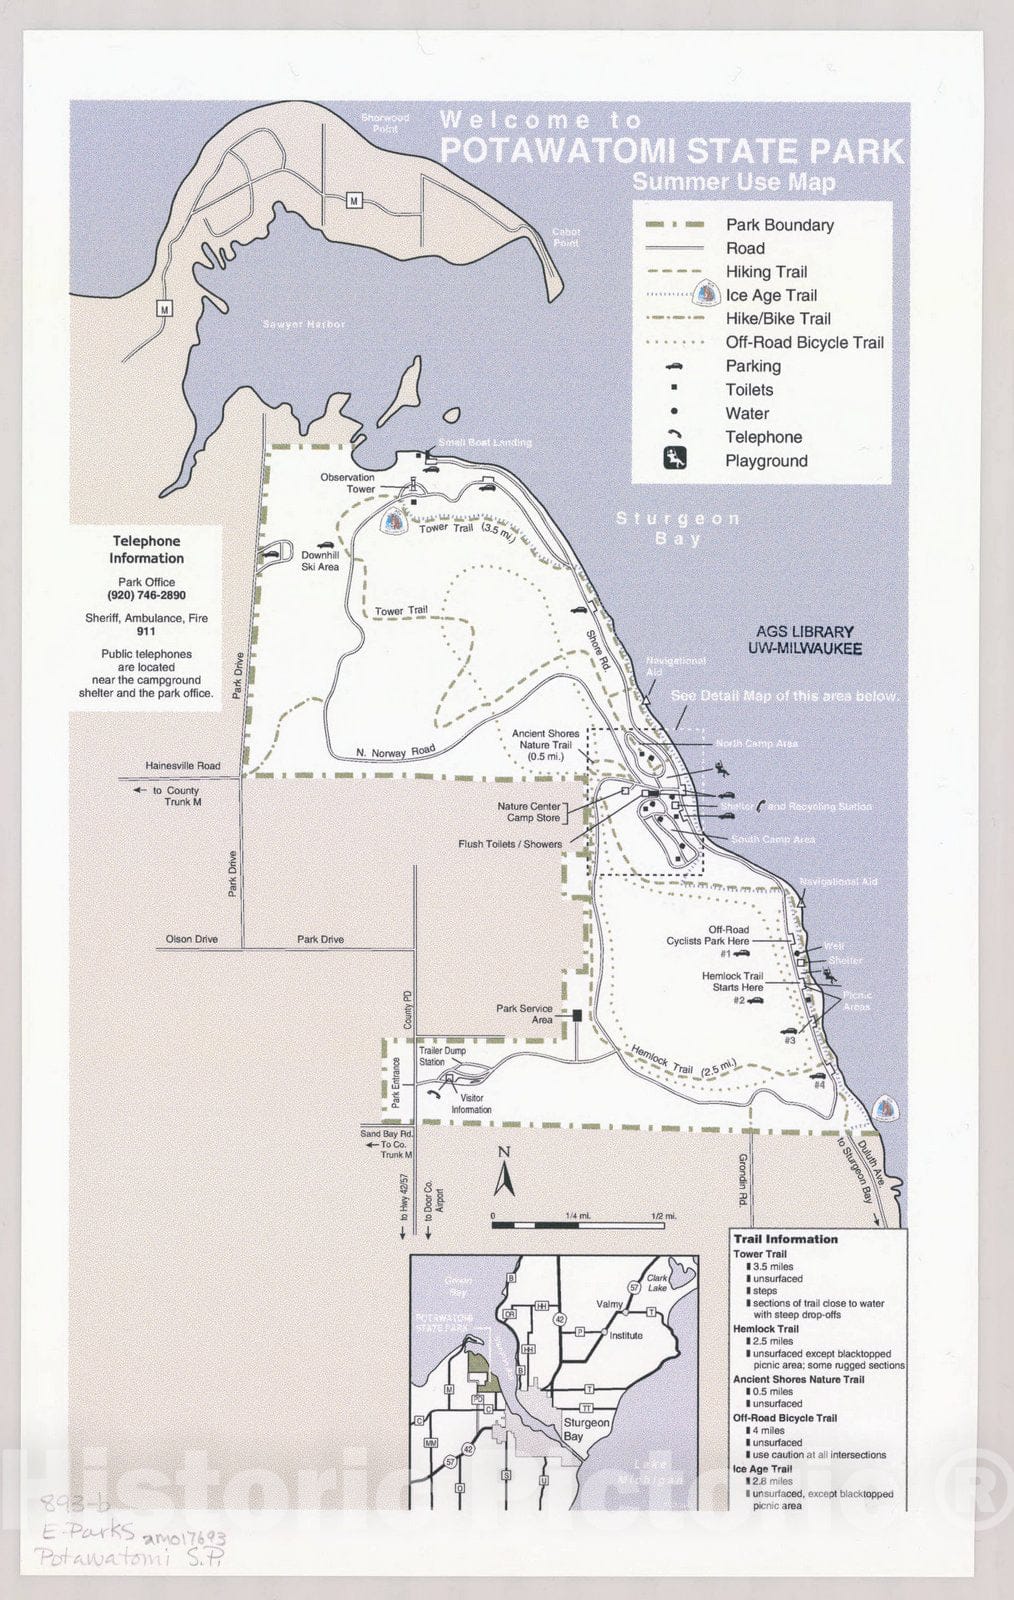 Map : Welcome to Potawatomi State Park, summer use map, Wisconsin , [Wisconsin state parks , forests, recreation areas & trails maps], Antique Vintage Reproduction